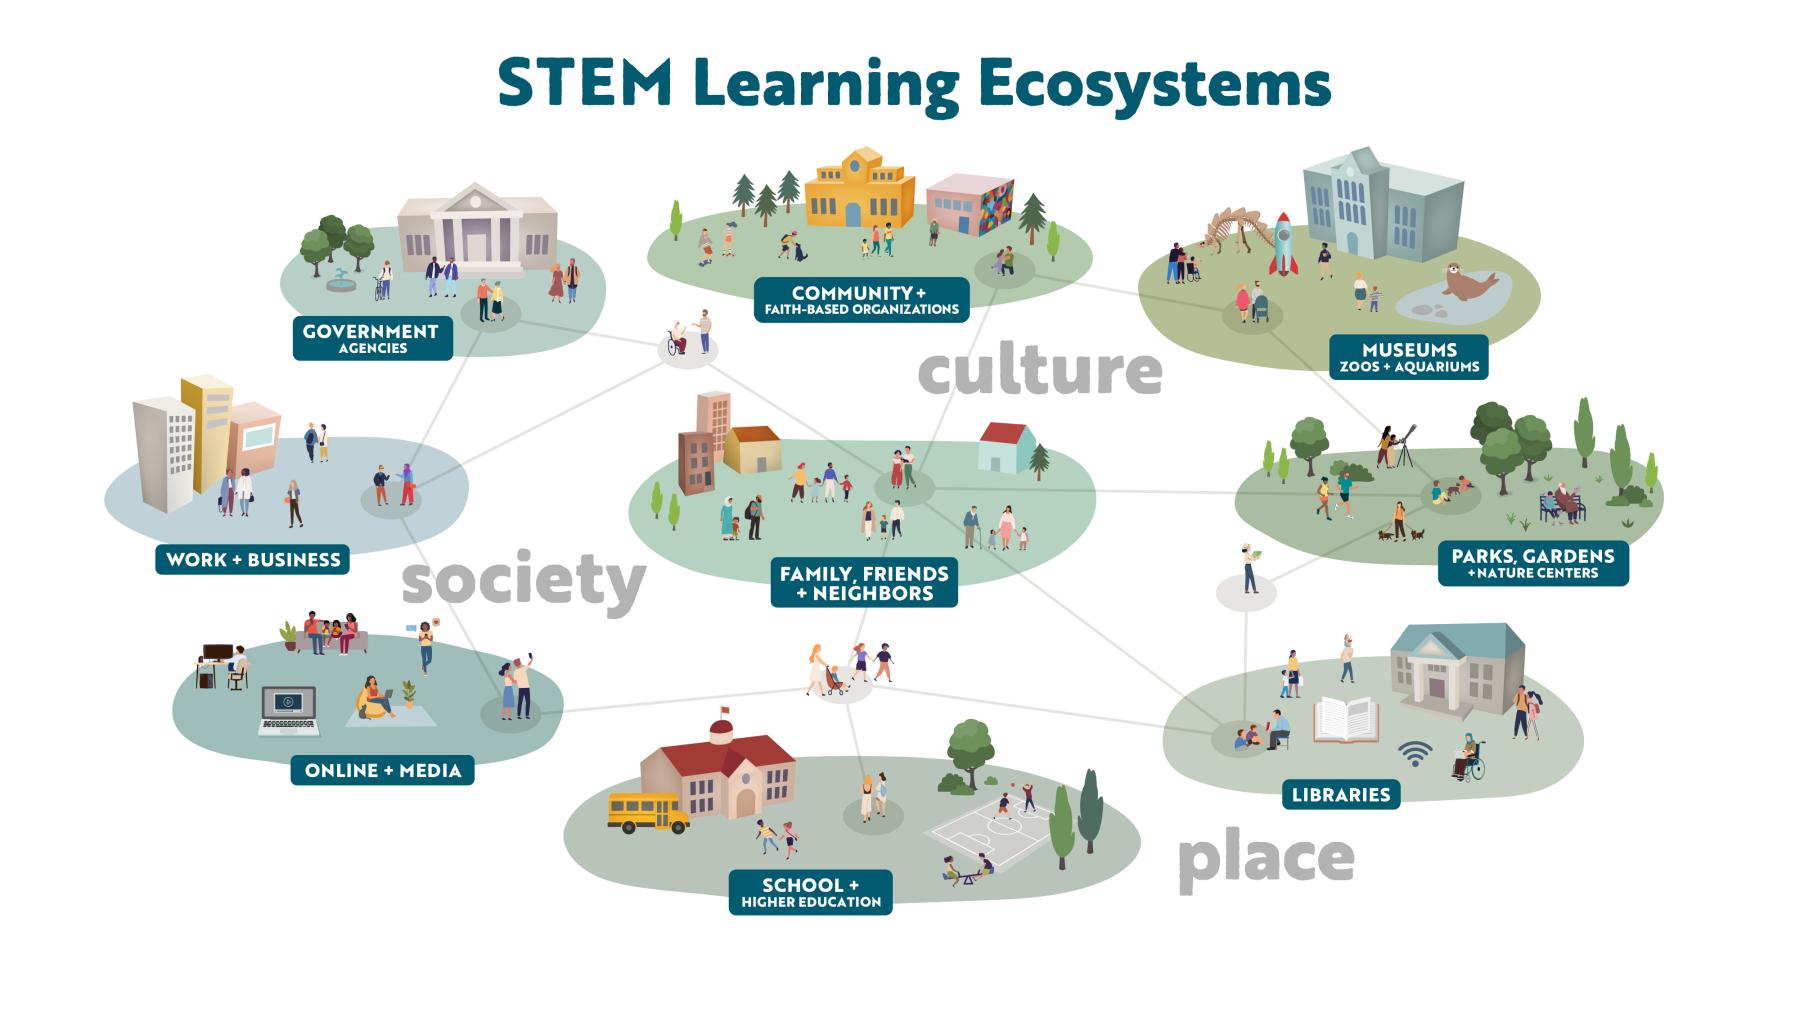 STEM Learning Ecosystem generalized example including the terms culture, society, and place